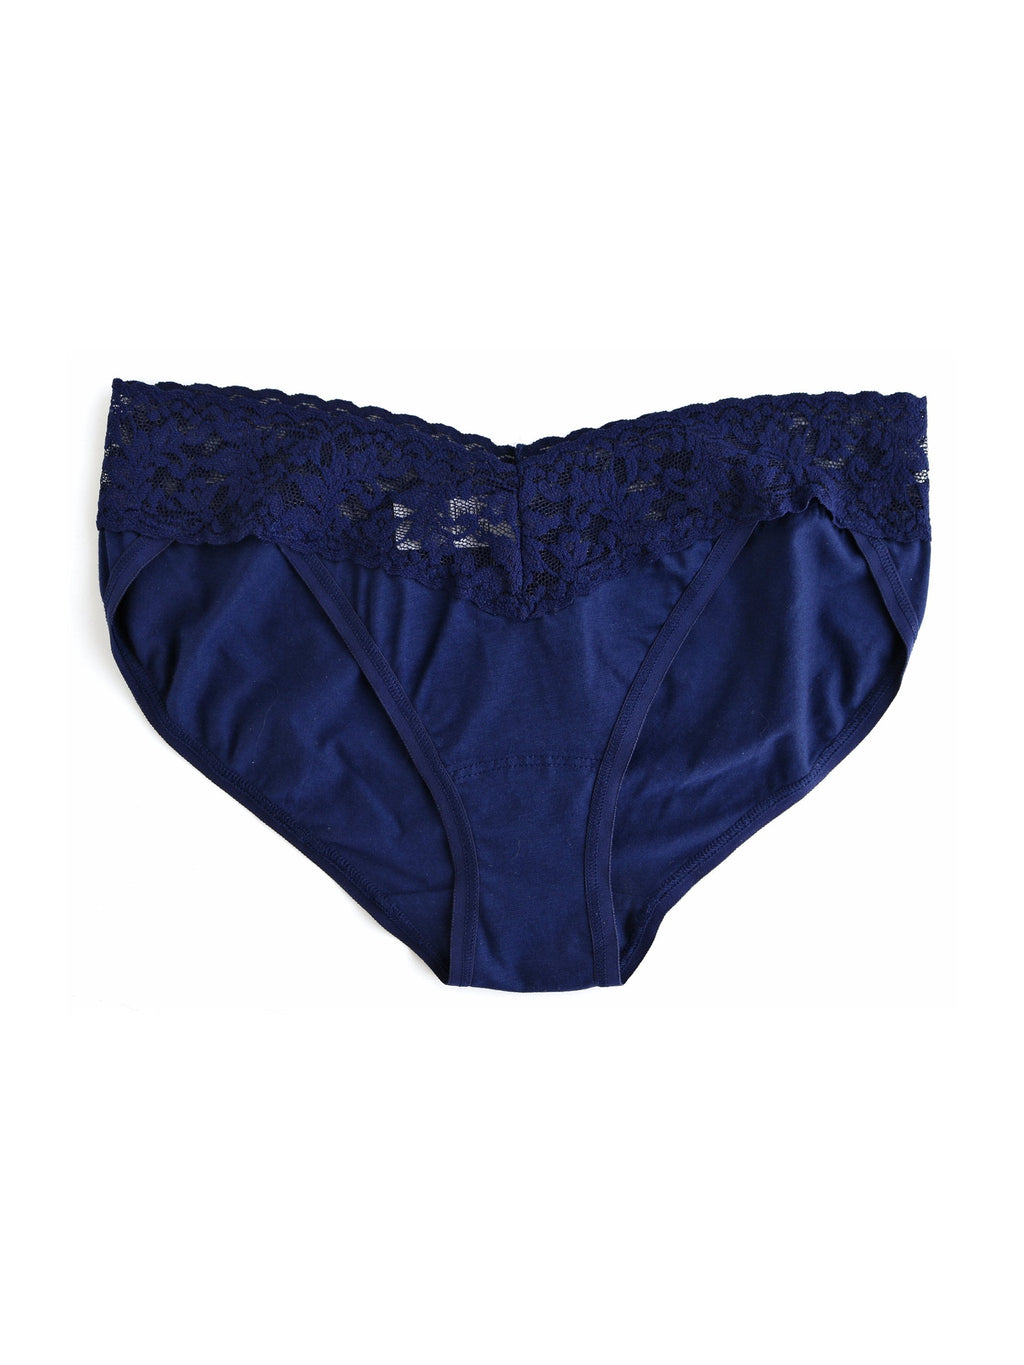 Summer special sale upto 50% off on panties - amanté – tagged